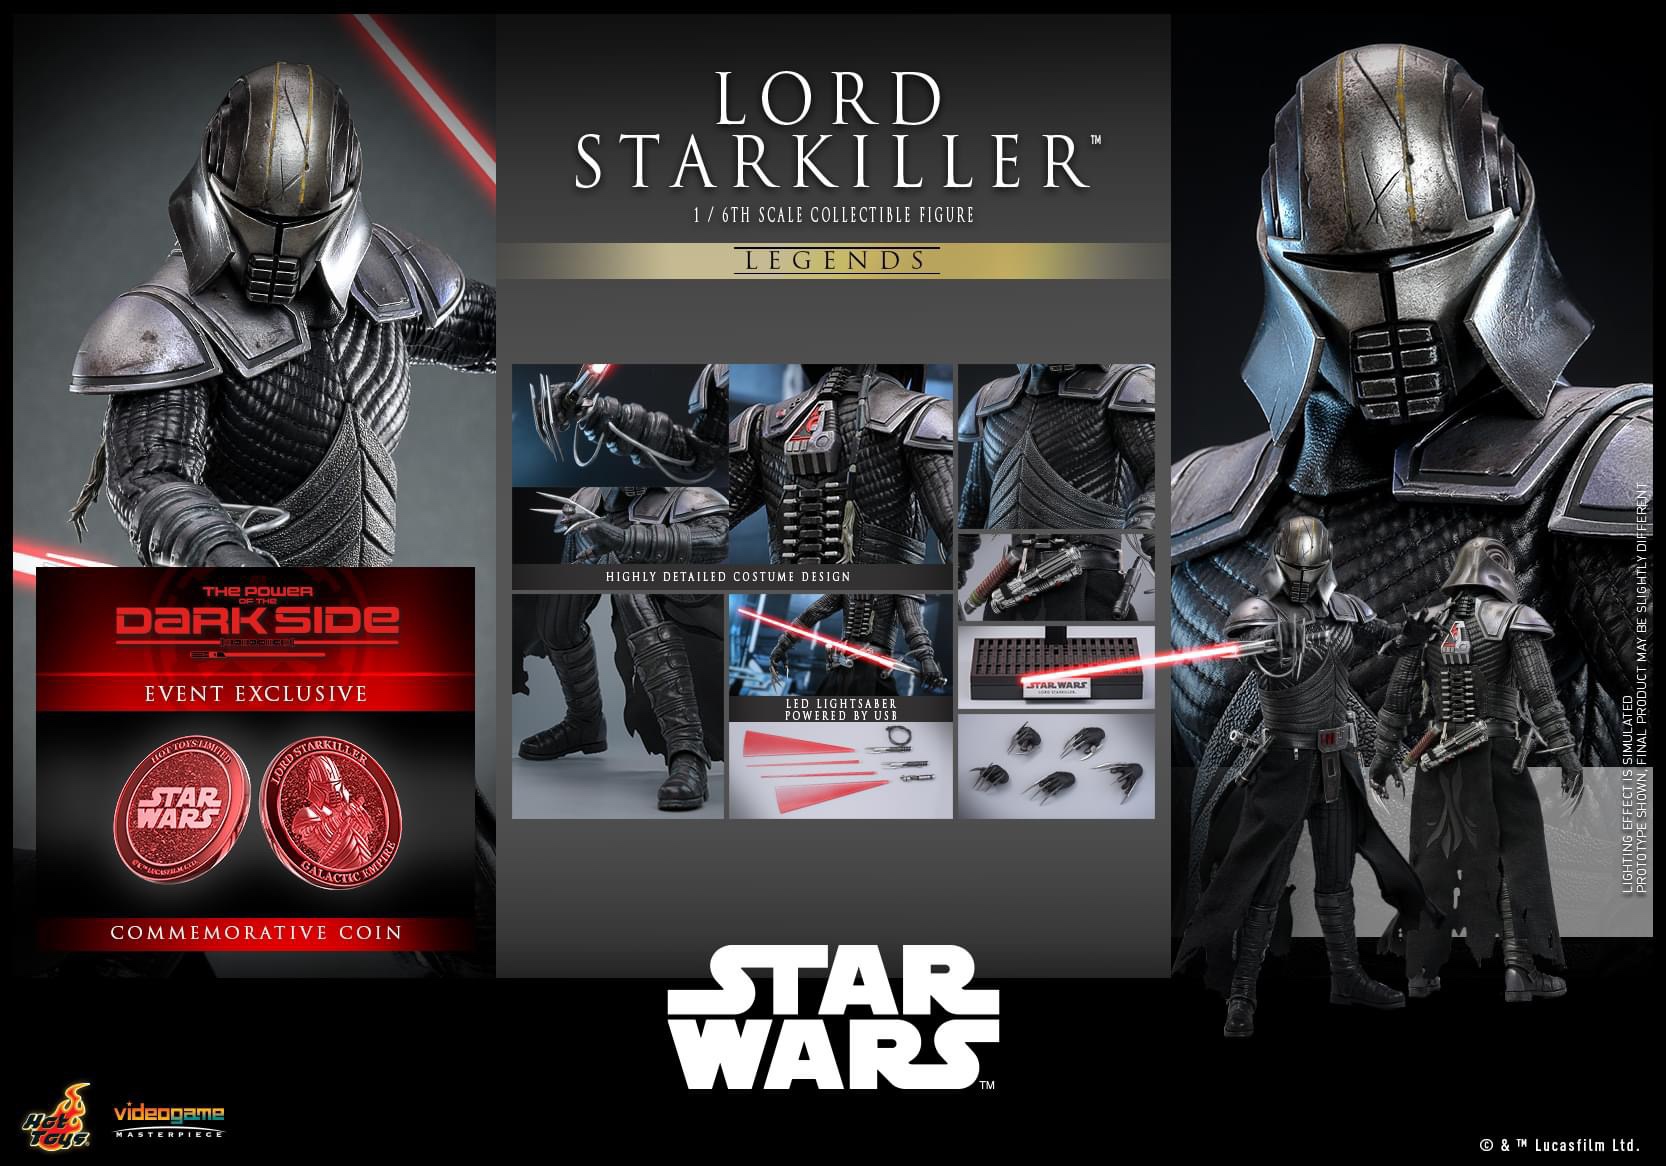 HOT TOYS VGM63B Star Wars™ - 1/6th scale Lord Starkiller™ Collectible Figure